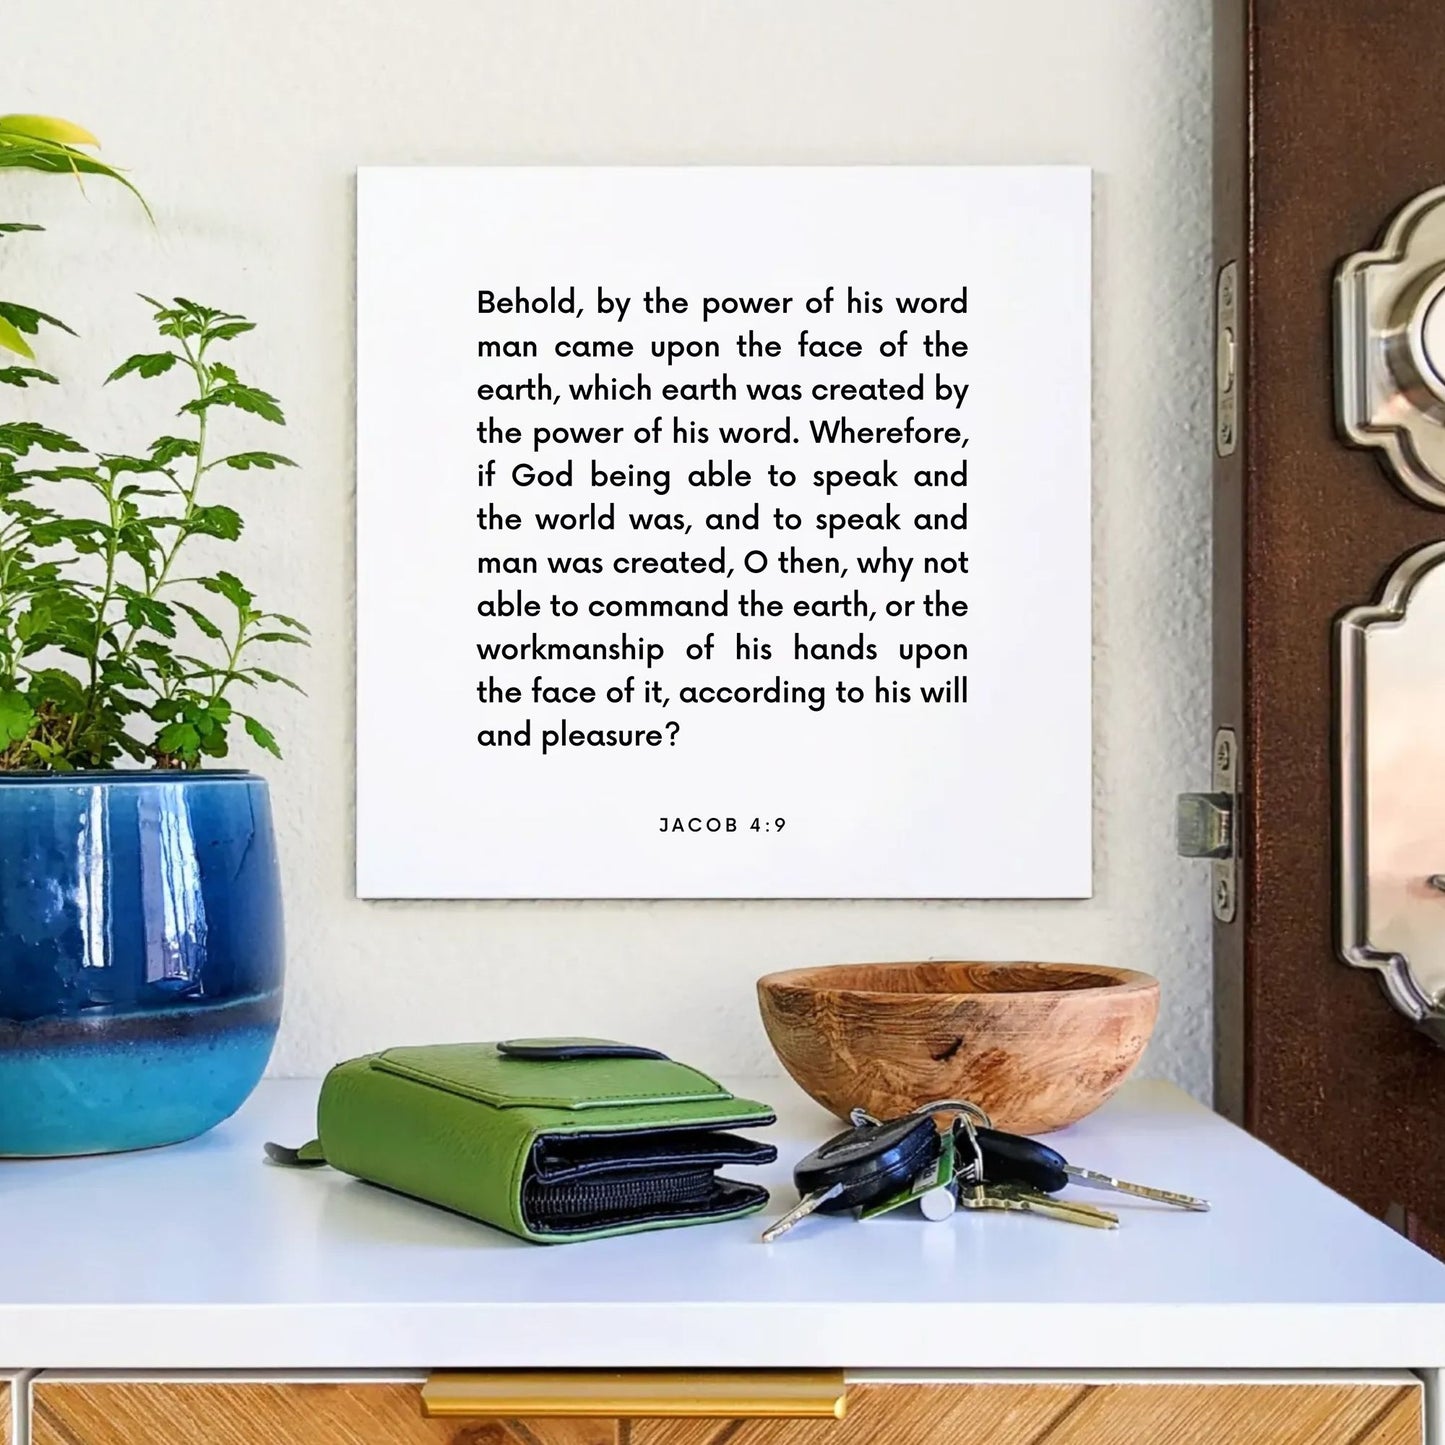 Entryway mouting of the scripture tile for Jacob 4:9 - "By the power of his word"